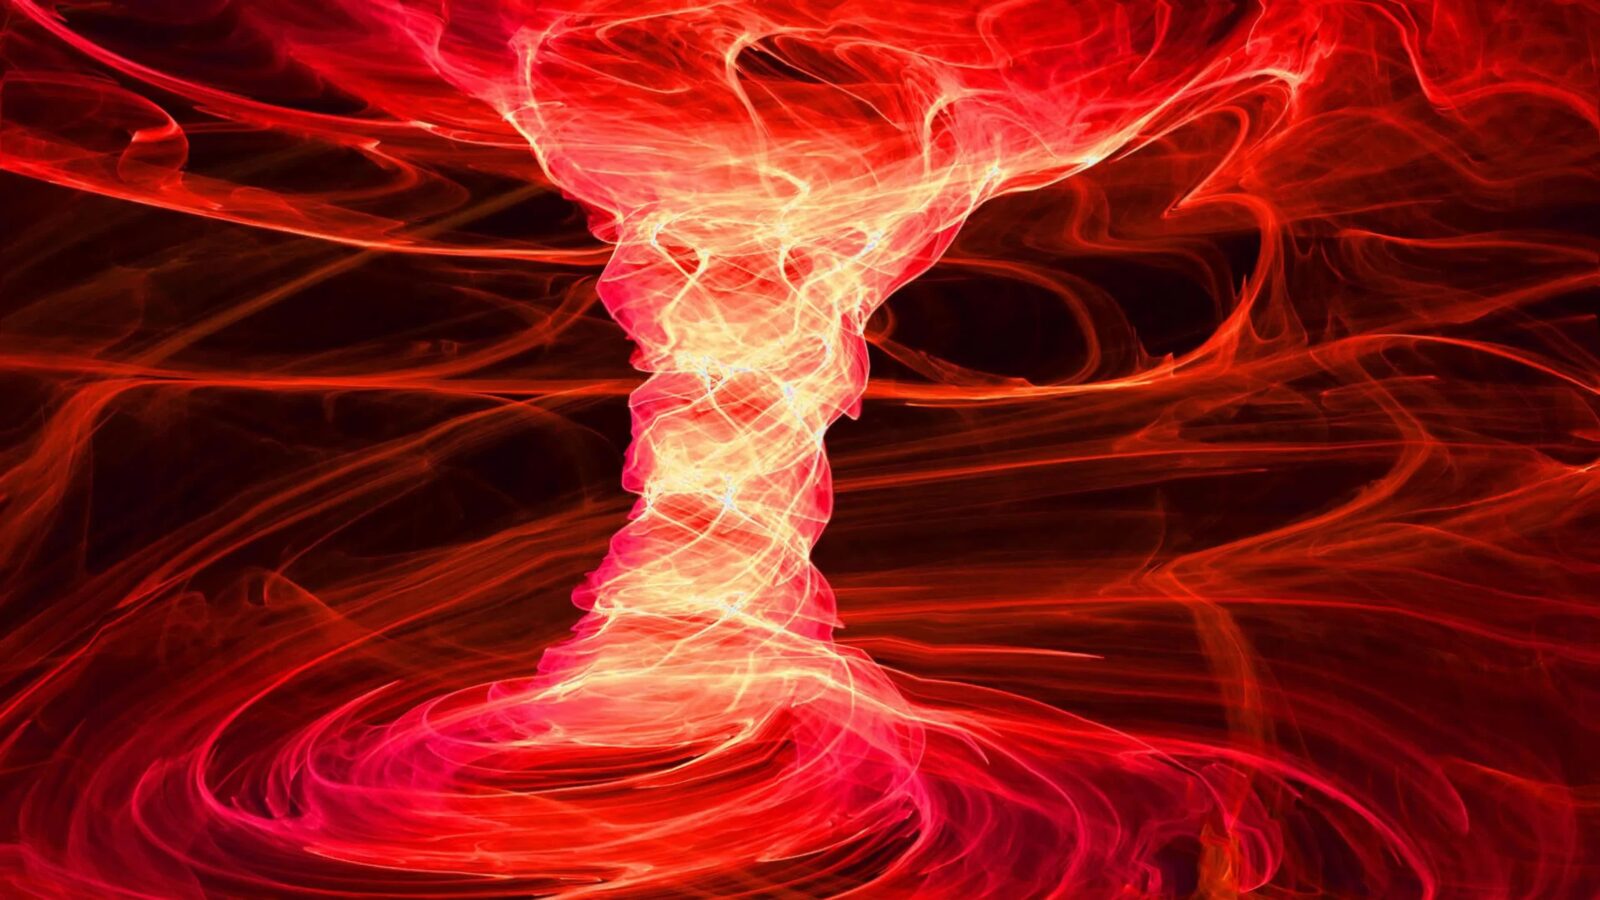 LiveWallpapers4Free.com | Red Fire Abstract Tornado 4K Quality - Free Live Wallpaper